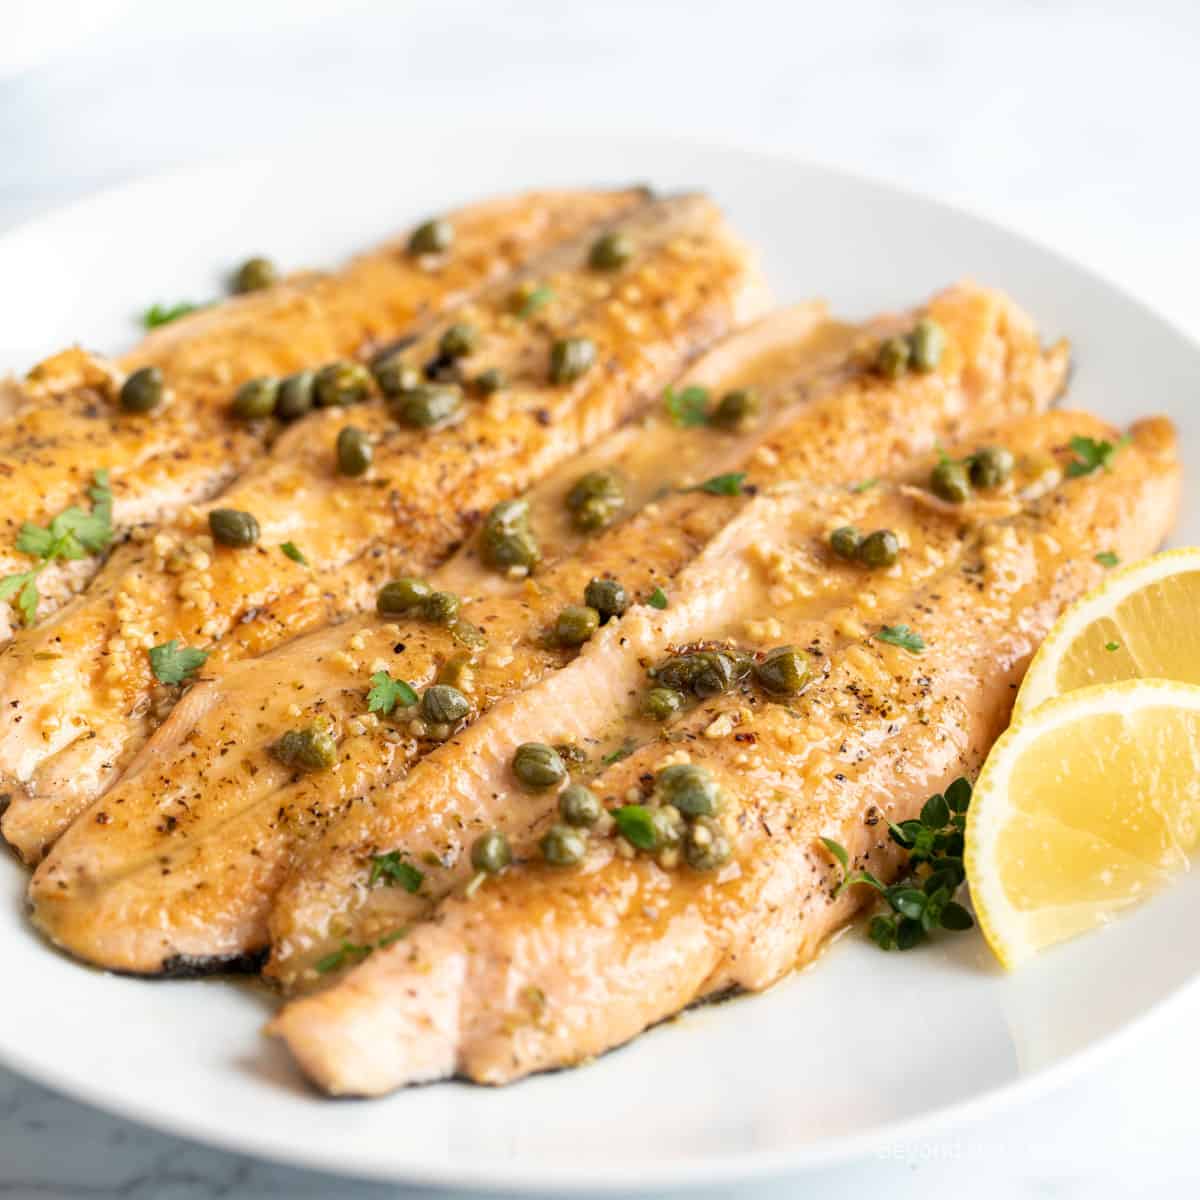 Trout fillets topped with capers.